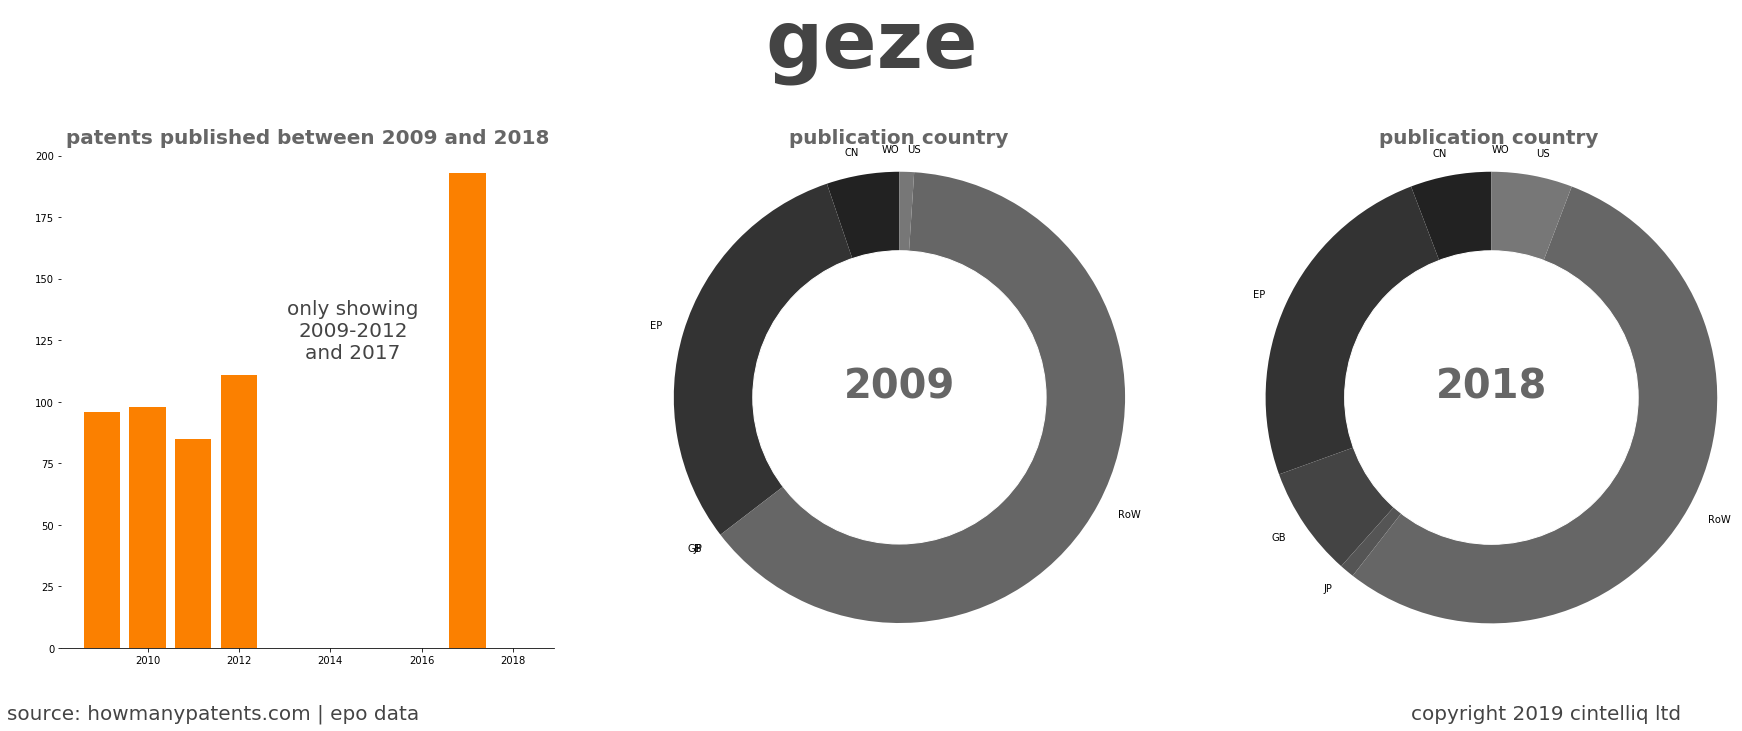 summary of patents for Geze